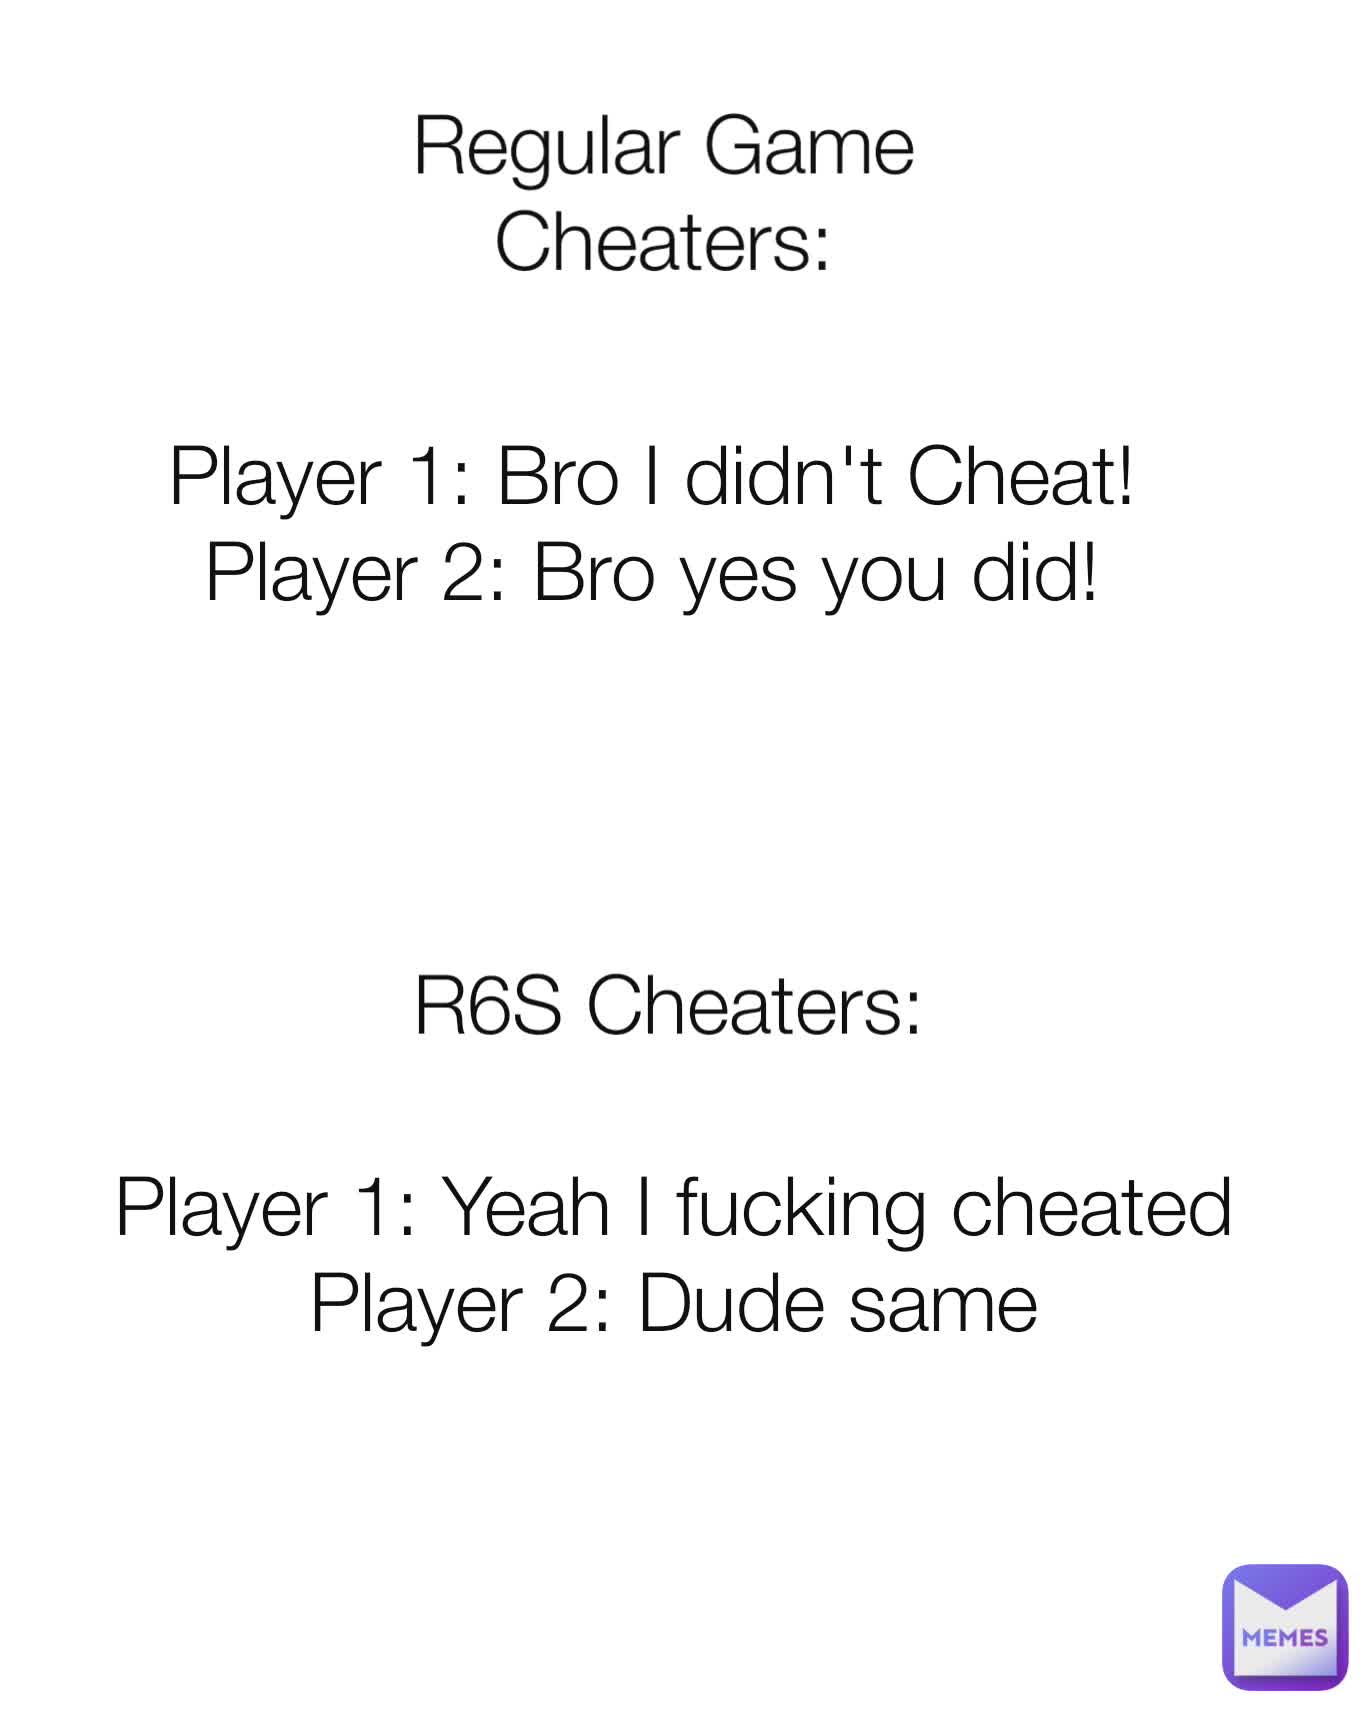 Regular Game Cheaters: Player 1: Bro I didn't Cheat!
Player 2: Bro yes you did! R6S Cheaters: Player 1: Yeah I fucking cheated
Player 2: Dude same